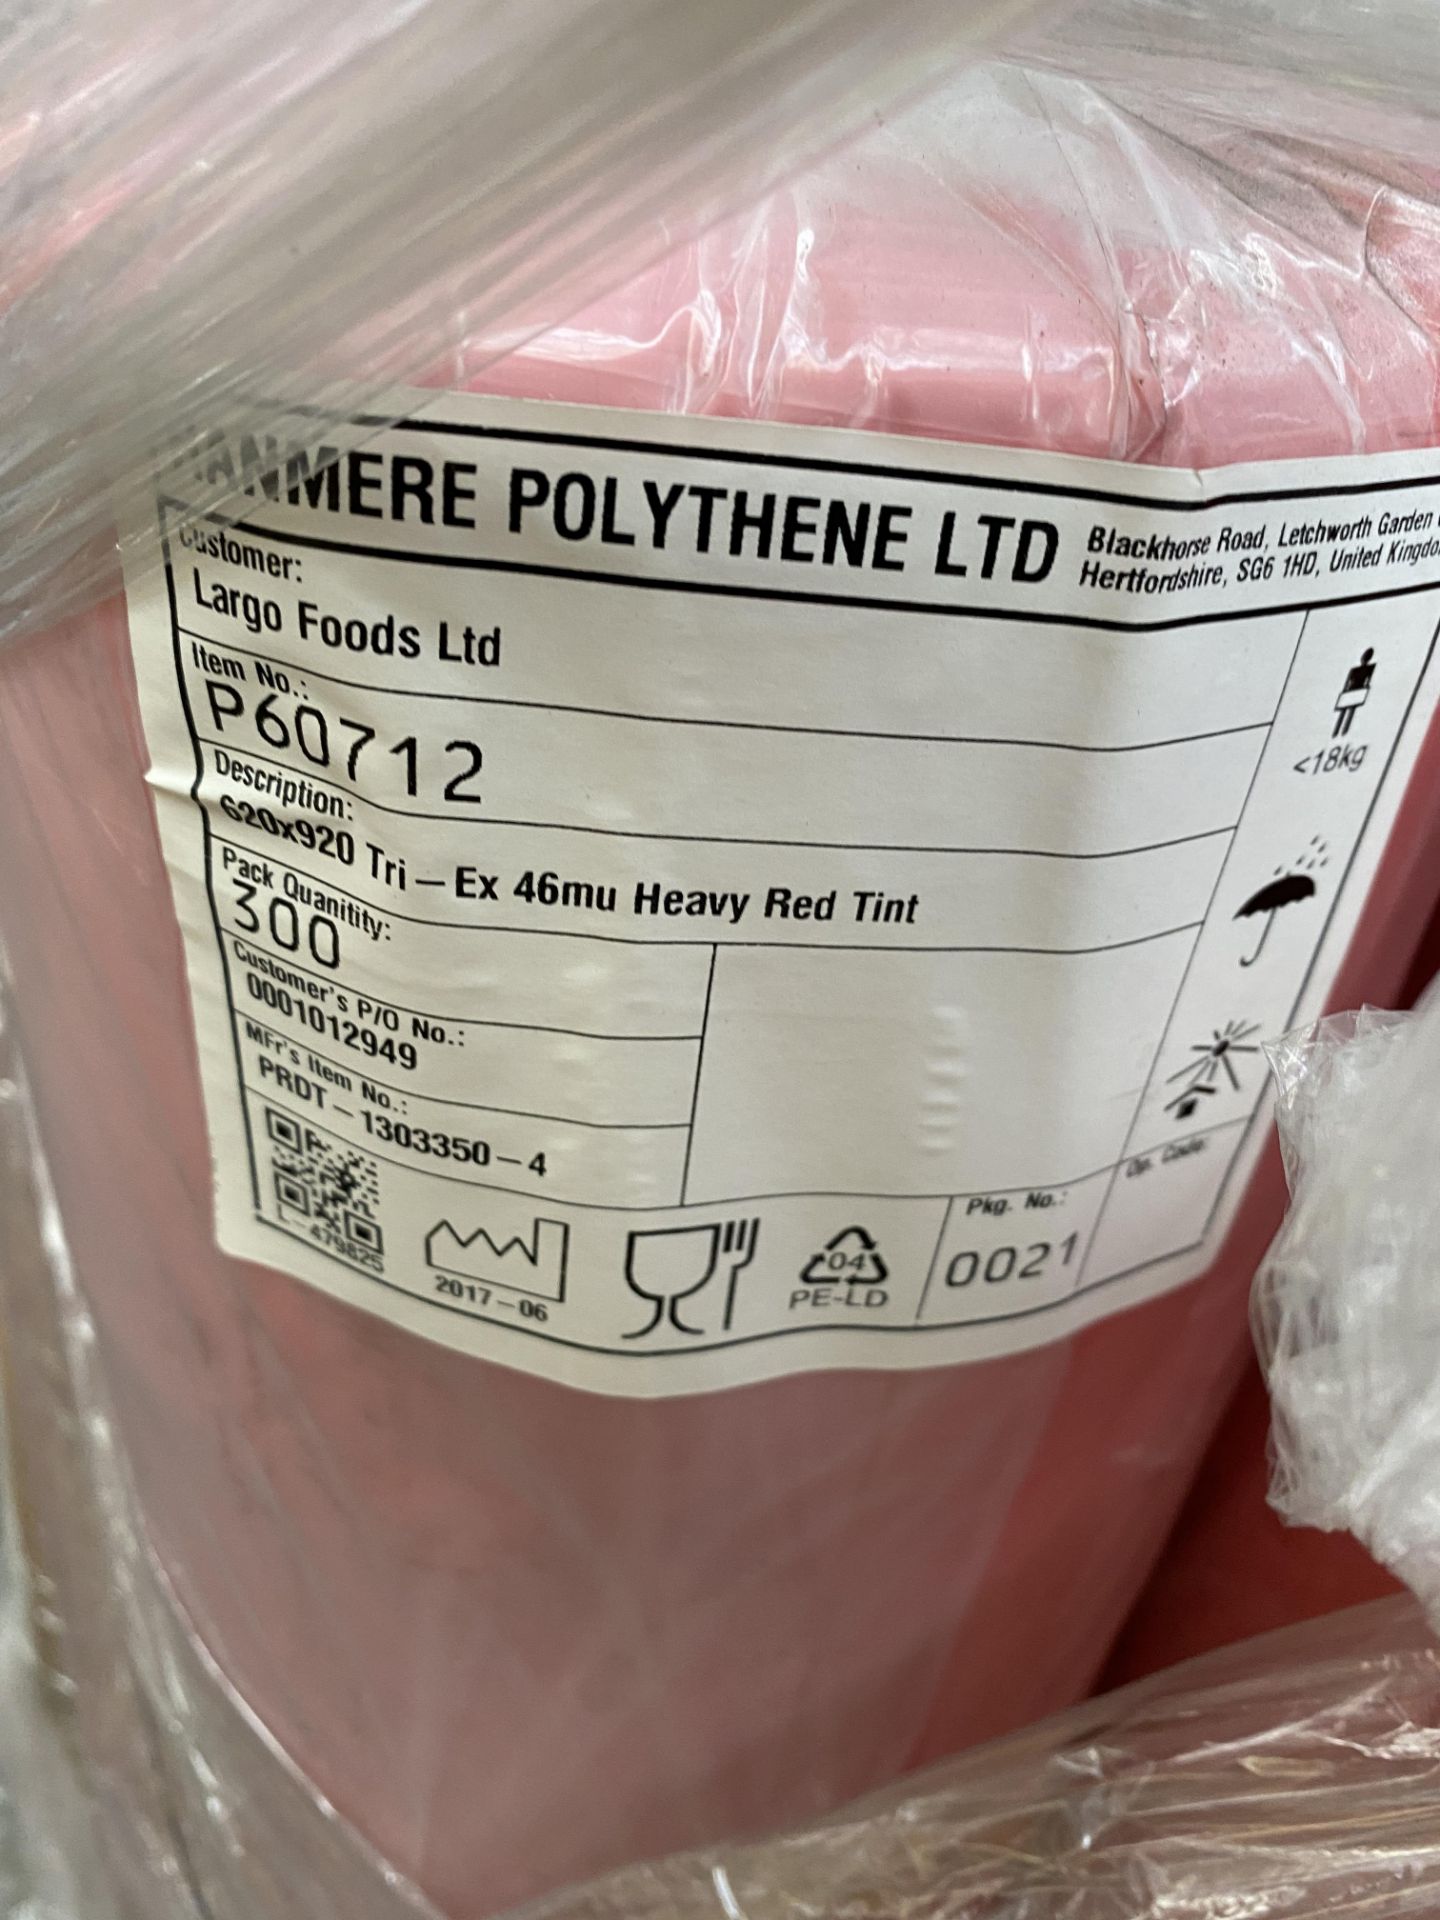 1 x pallet of Polythene thick bags - rolls of 300 bags, 620x920- 15 x red - Image 2 of 2